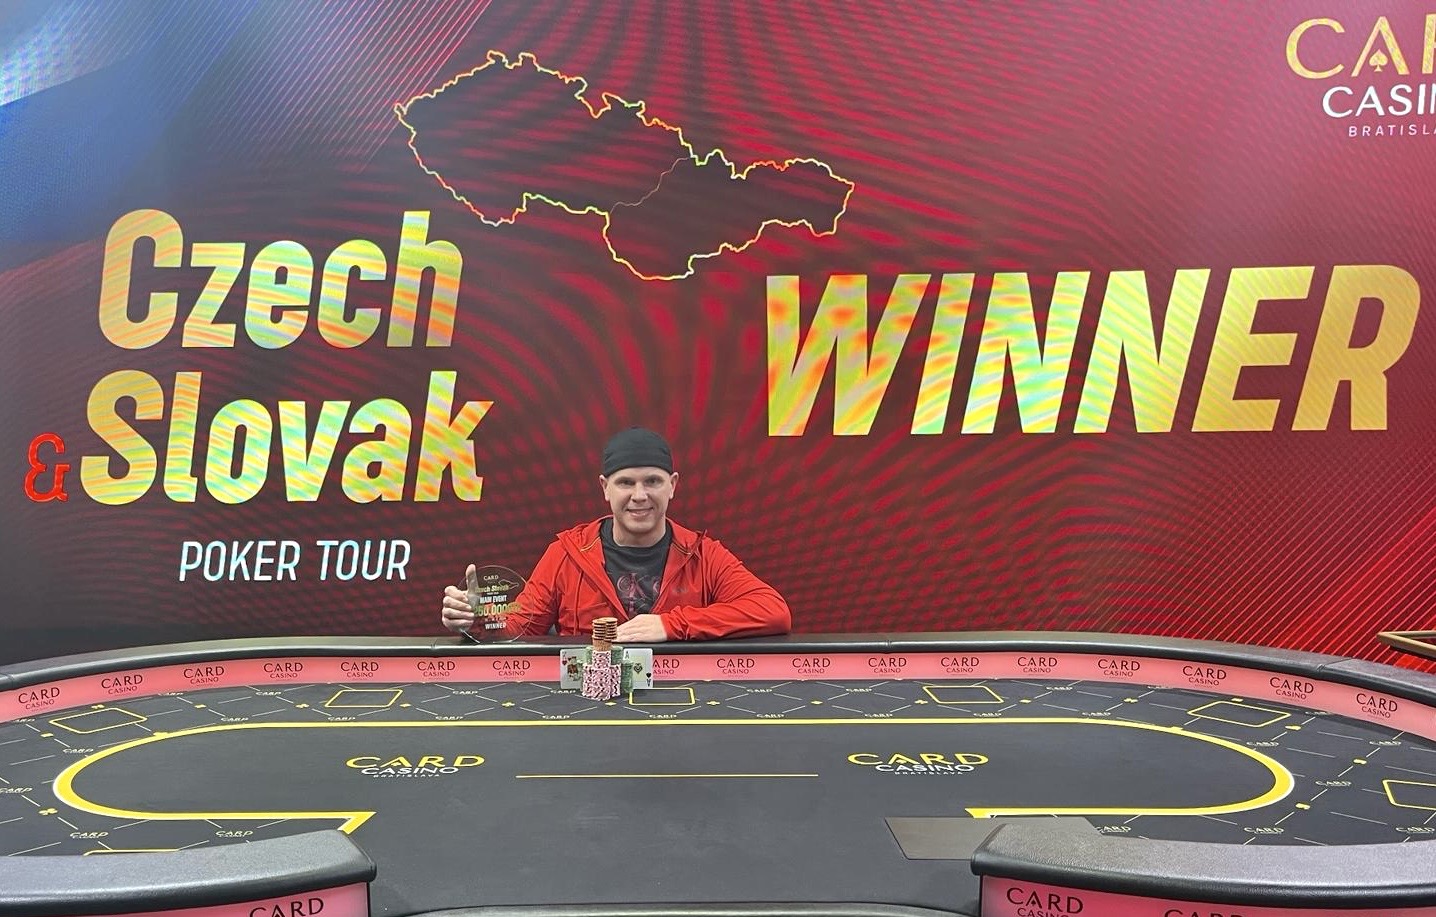 The Czech-Slovak Poker Tour was dominated by Hungarian Kis. The best of the Slovaks was Koreň